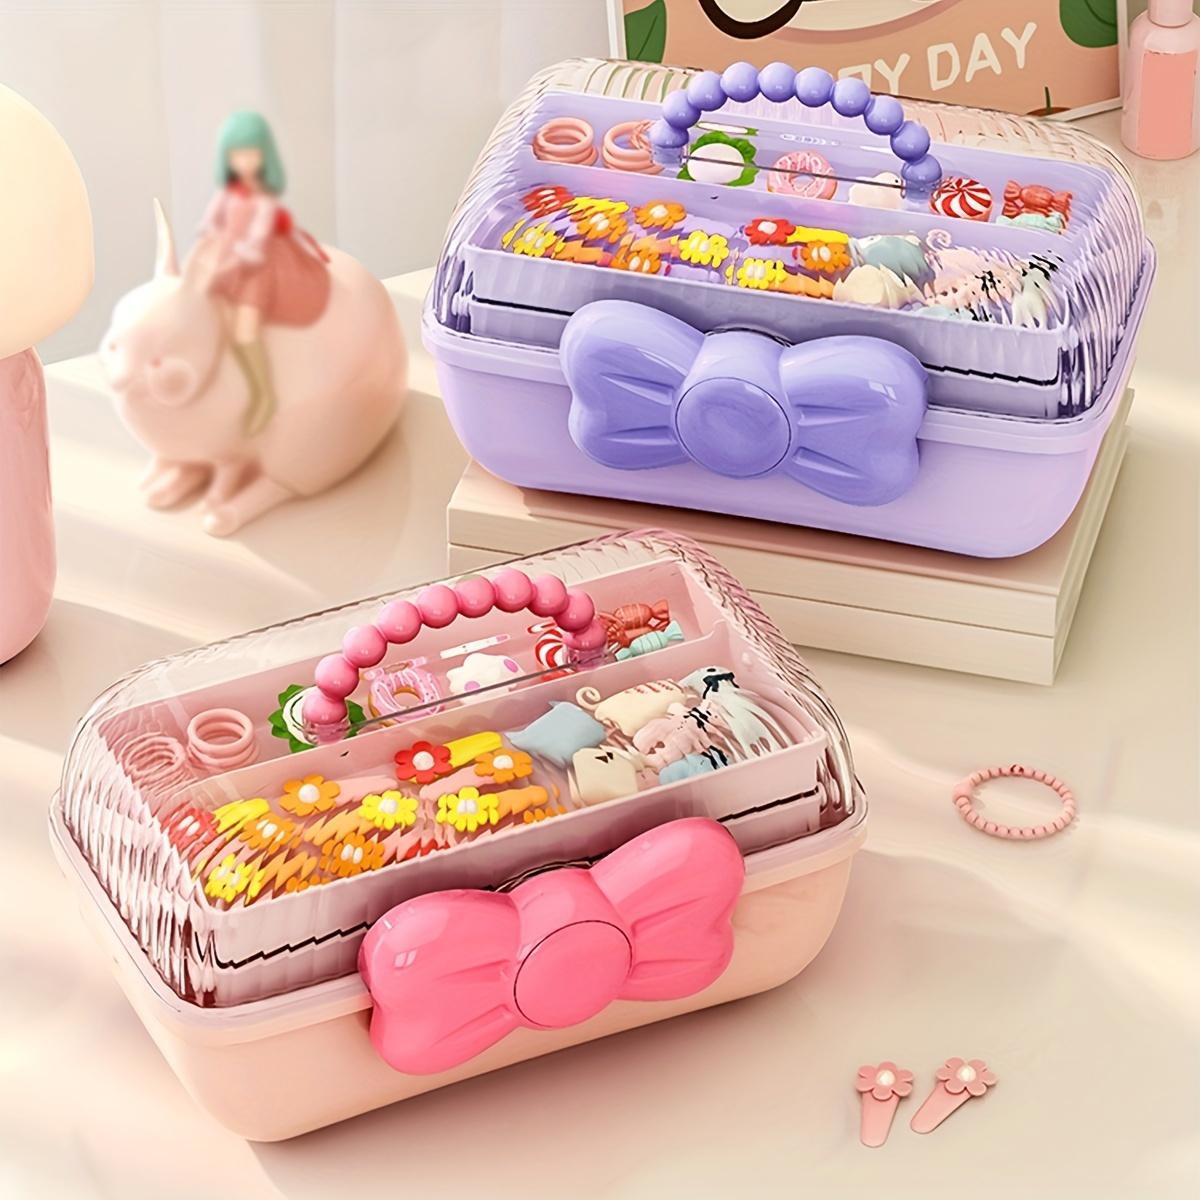 Lurrose Box hair barrettes hair clips storage case for storage cute jewelry  holder hair accessory container hair accessory organizer for girls plastic